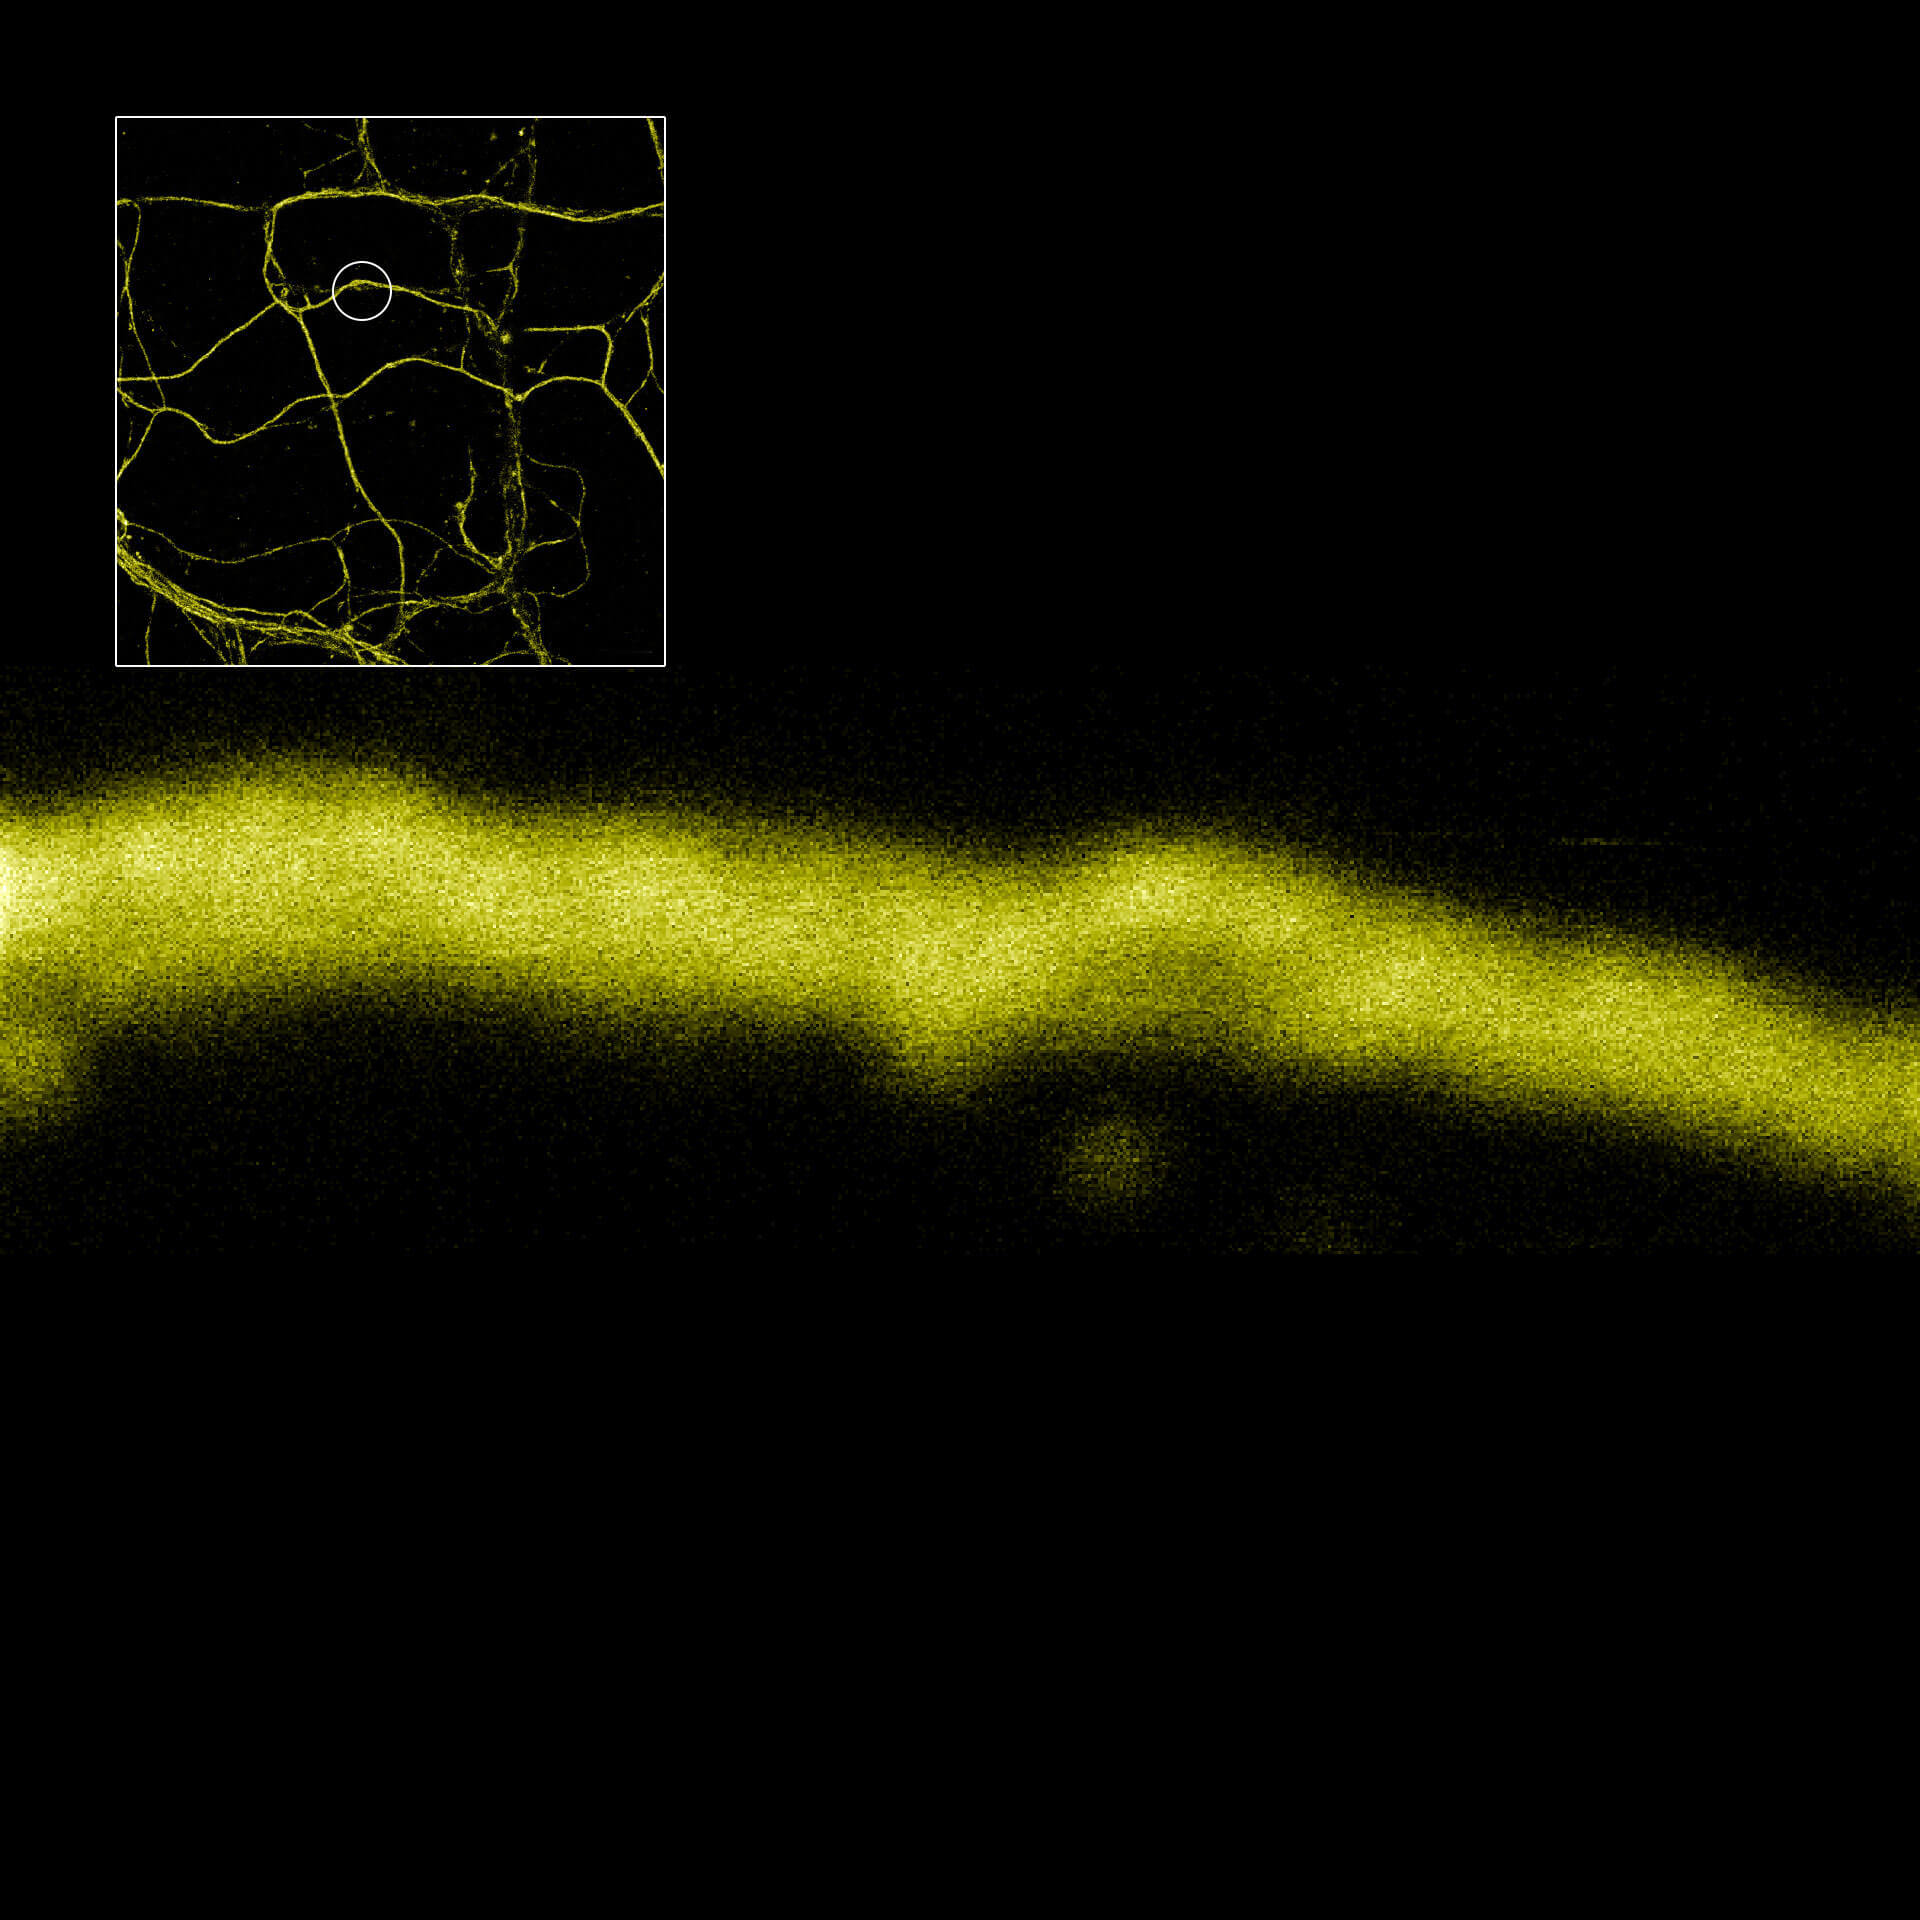 MINFLUX imaging of βII spectrin in a primary hippocampal neuron labeled with abberior FLUX 680 by indirect immunofluorescence.